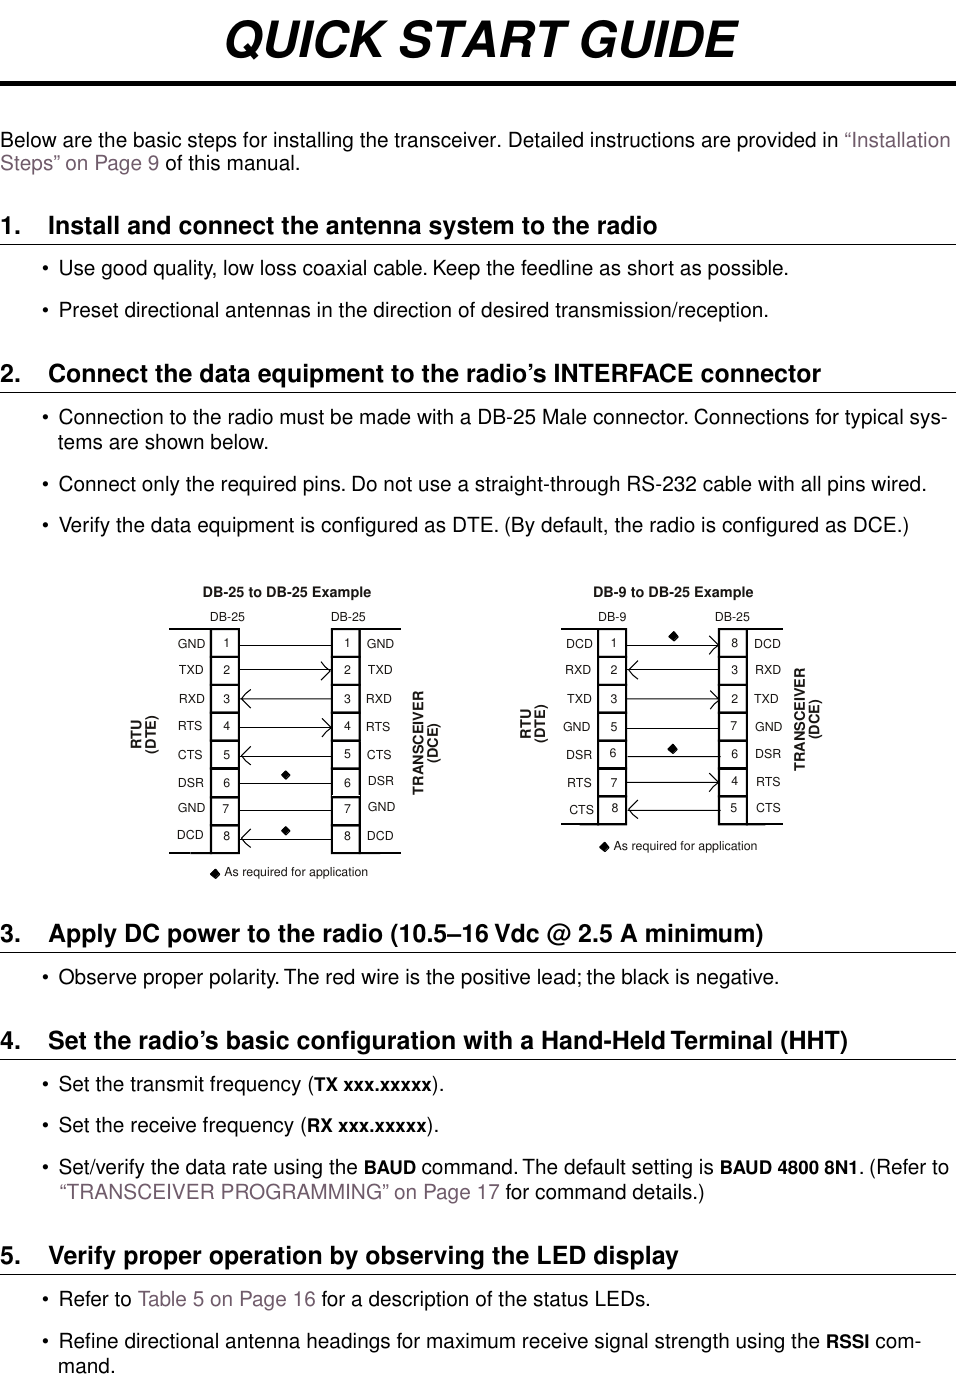  QUICK START GUIDE Below are the basic steps for installing the transceiver. Detailed instructions are provided in “Installation Steps” on Page 9 of this manual. 1. Install and connect the antenna system to the radio • Use good quality, low loss coaxial cable. Keep the feedline as short as possible.• Preset directional antennas in the direction of desired transmission/reception. 2. Connect the data equipment to the radio’s INTERFACE connector • Connection to the radio must be made with a DB-25 Male connector. Connections for typical sys-tems are shown below. • Connect only the required pins. Do not use a straight-through RS-232 cable with all pins wired.• Verify the data equipment is conﬁgured as DTE. (By default, the radio is conﬁgured as DCE.) 3. Apply DC power to the radio (10.5–16 Vdc @ 2.5 A minimum) • Observe proper polarity. The red wire is the positive lead; the black is negative. 4. Set the radio’s basic conﬁguration with a Hand-Held Terminal (HHT) • Set the transmit frequency ( TX xxx.xxxxx ).• Set the receive frequency ( RX xxx.xxxxx ).• Set/verify the data rate using the  BAUD  command. The default setting is  BAUD 4800 8N1 . (Refer to “TRANSCEIVER PROGRAMMING” on Page 17 for command details.) 5. Verify proper operation by observing the LED display • Refer to Table 5 on Page 16 for a description of the status LEDs.• Reﬁne directional antenna headings for maximum receive signal strength using the  RSSI  com-mand. DB-25 DB-25232345206DSR DSR6TXDRXDGNDRTSCTSTXDRXDGND4CTS5RTSDB-9 DB-25DB-9 to DB-25 ExampleDB-25 to DB-25 Example114523325207RXDTXDDCDGNDDSRRTSRXDTXDDCDGNDAs required for application51876CTSDSRRTSCTS864577GND GND8 8DCD DCDAs required for applicationRTU(DTE)TRANSCEIVER(DCE)RTU(DTE)TRANSCEIVER(DCE)